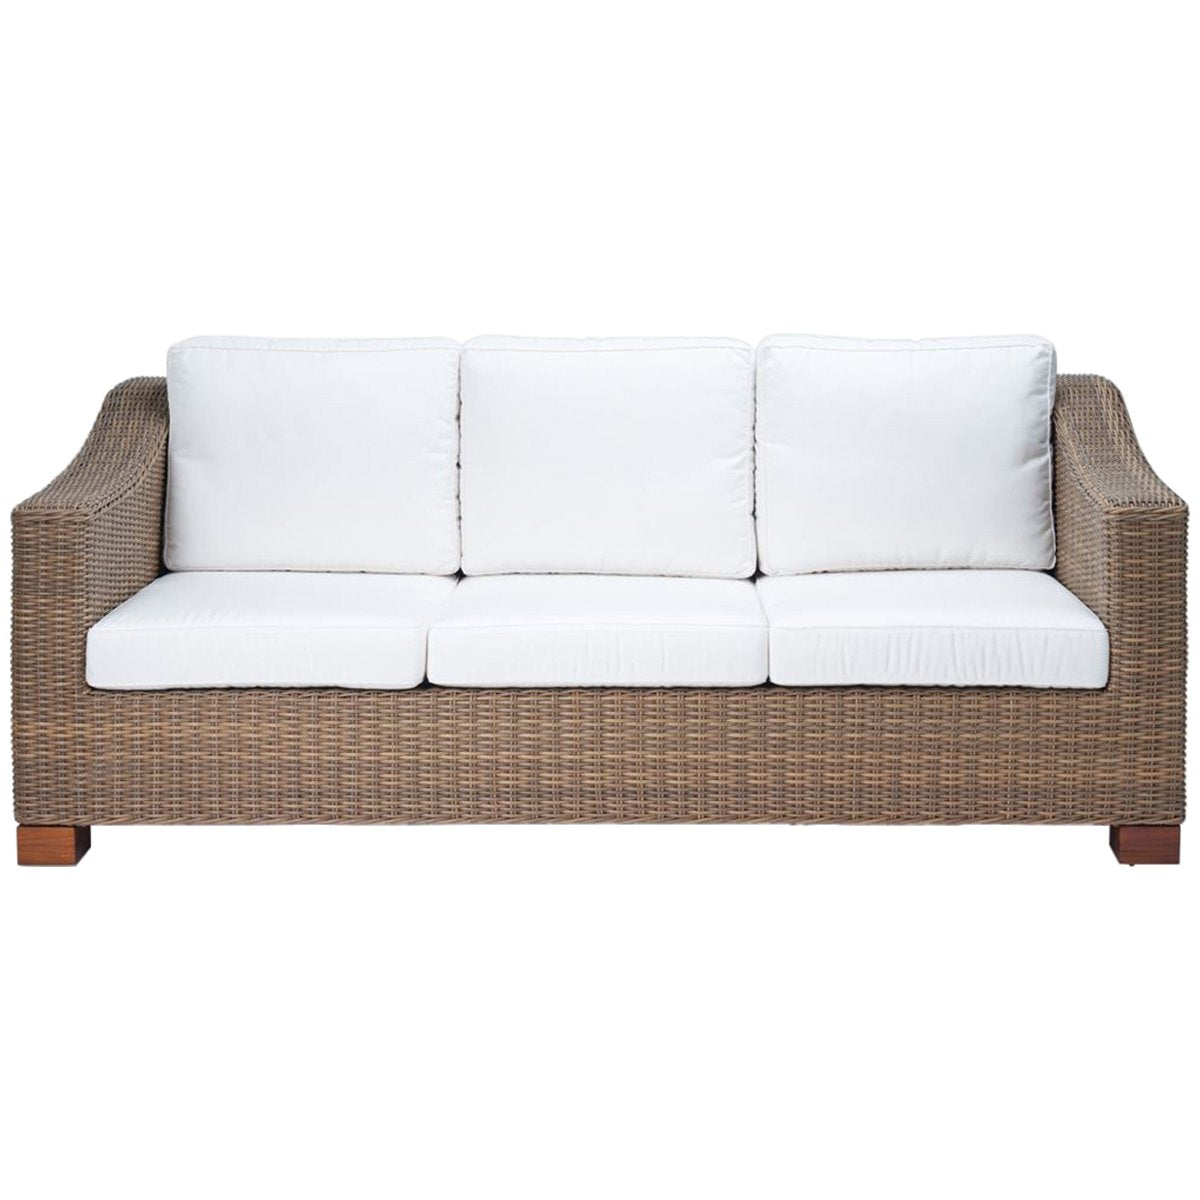 Made Goods Marina Faux Wicker Outdoor Sofa in Garonne Leather